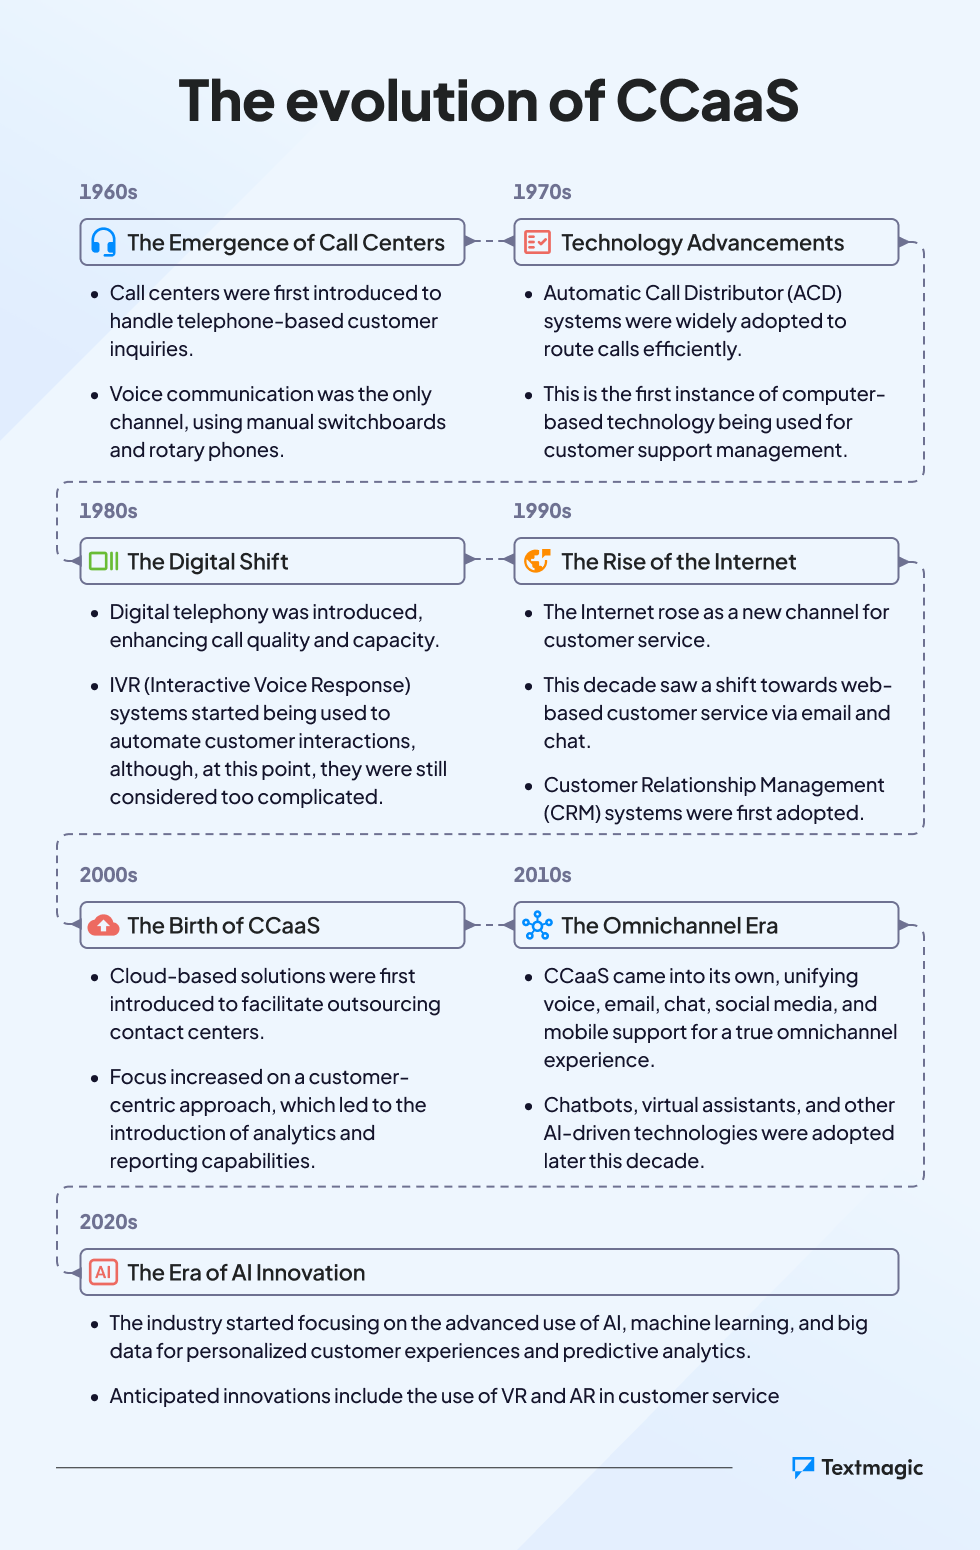 Infographic depicting the evolution of the CCaaS model over the decades